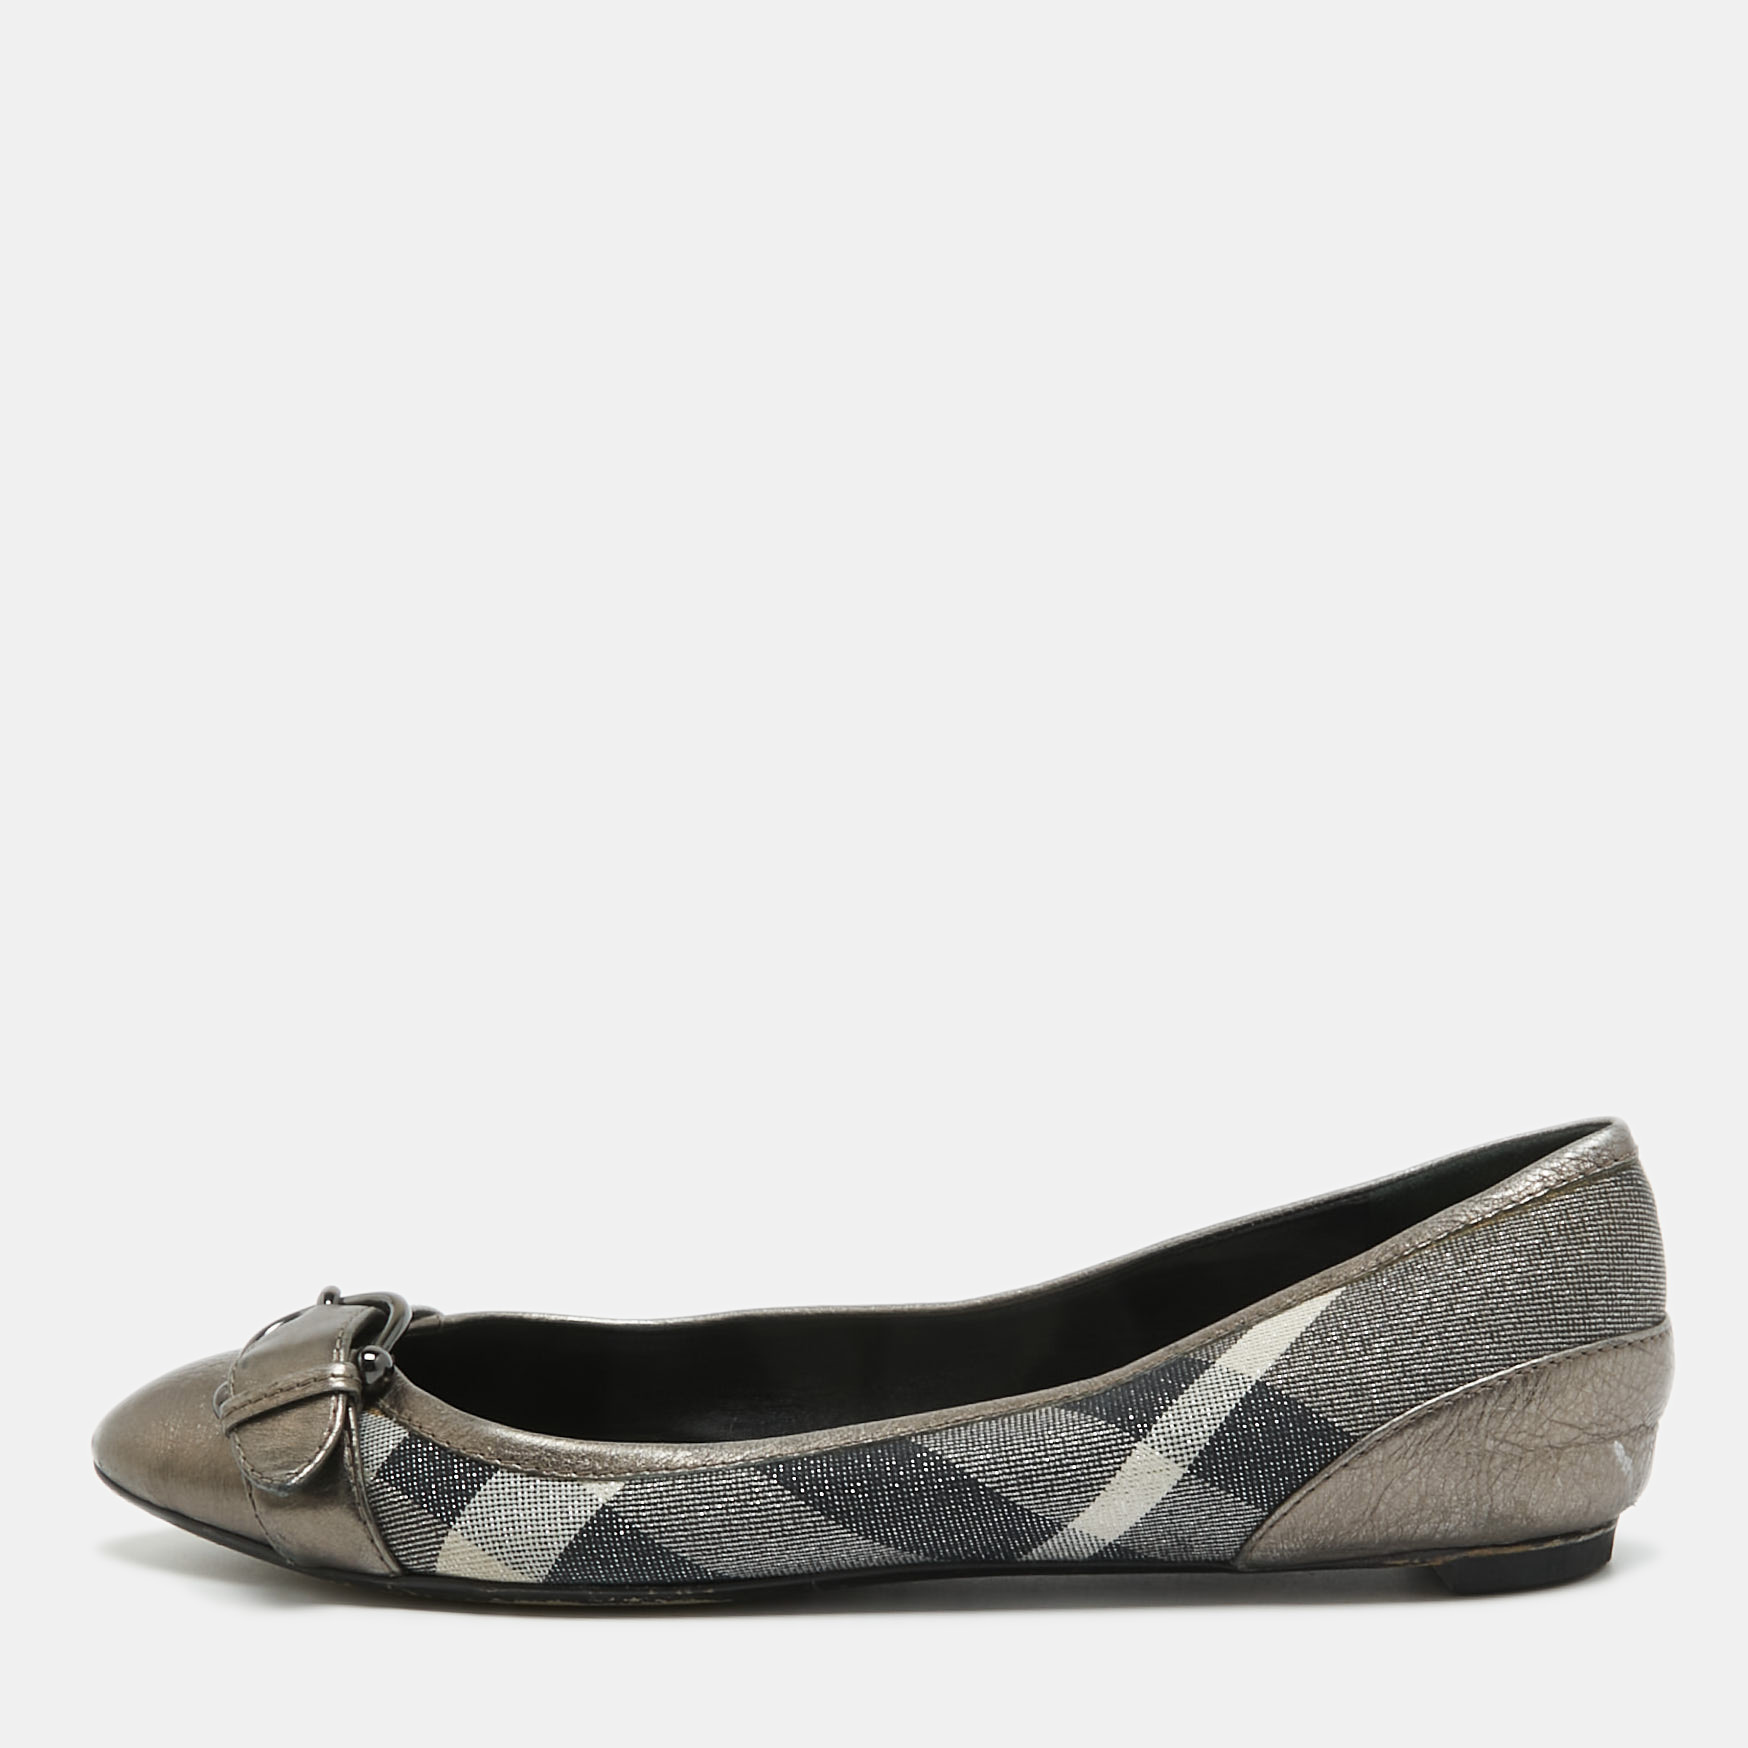 Pre-owned Burberry Metallic Leather And Glitter Nova Check Canvas Pointed Toe Flats Size 38